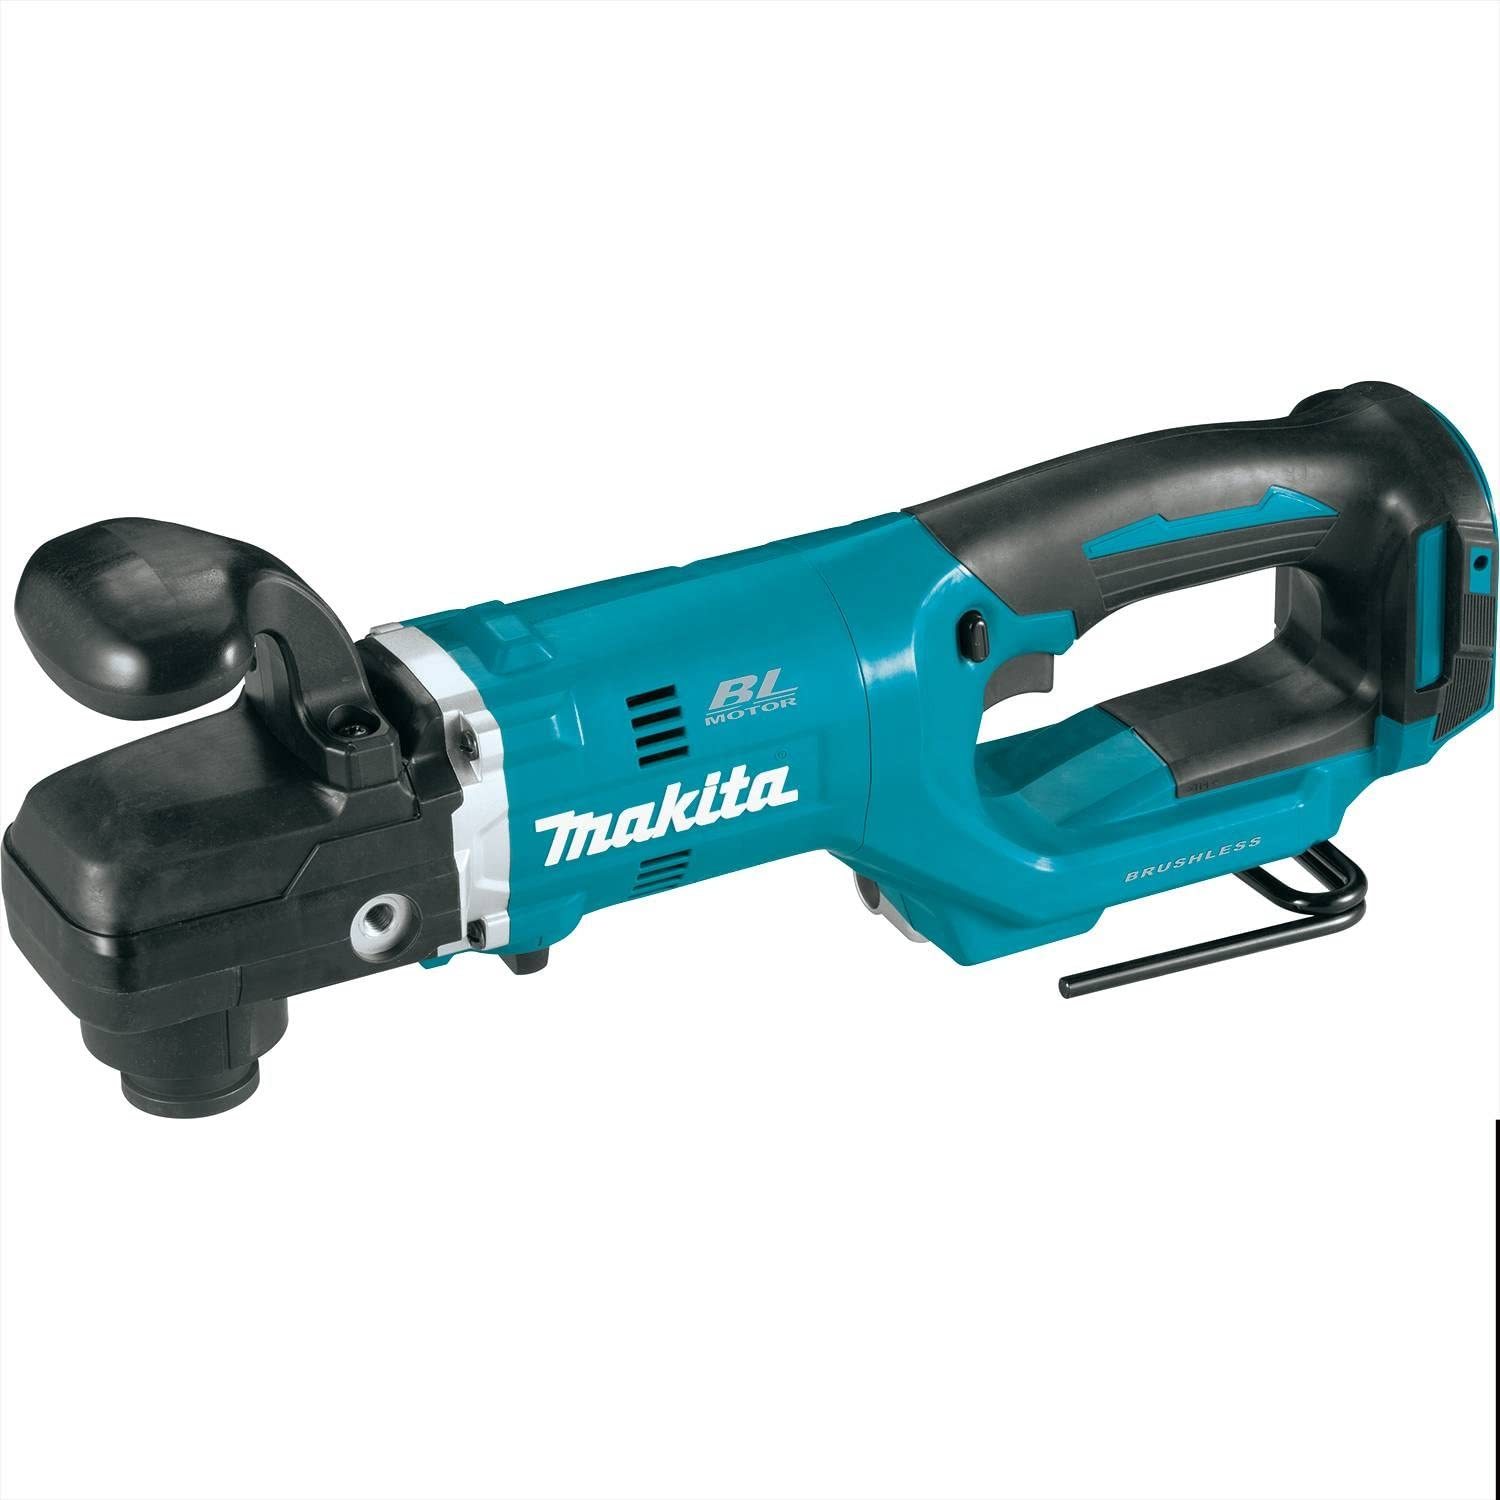 Makita Xad06Z 18V Lxt Lithium-Ion Brushless and 50 similar items